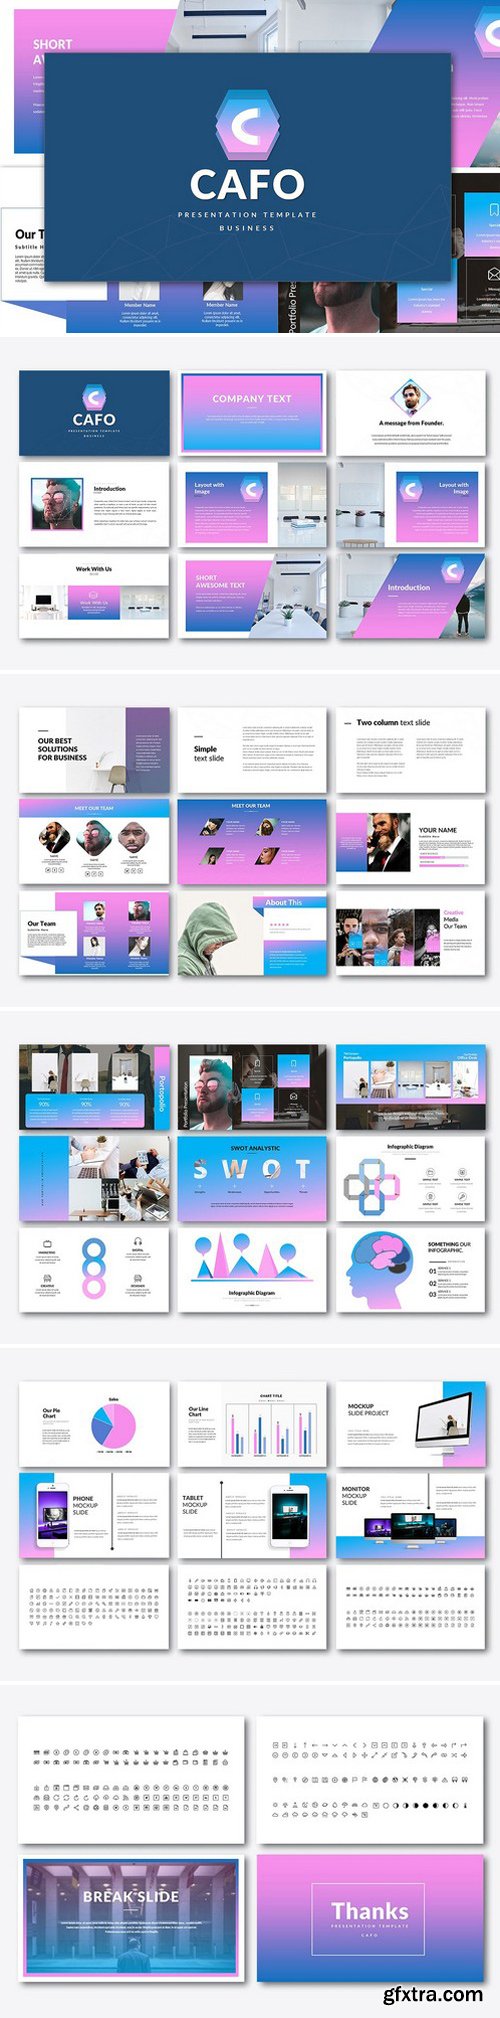 CM - Cafo Business Powerpoint Template 1927034